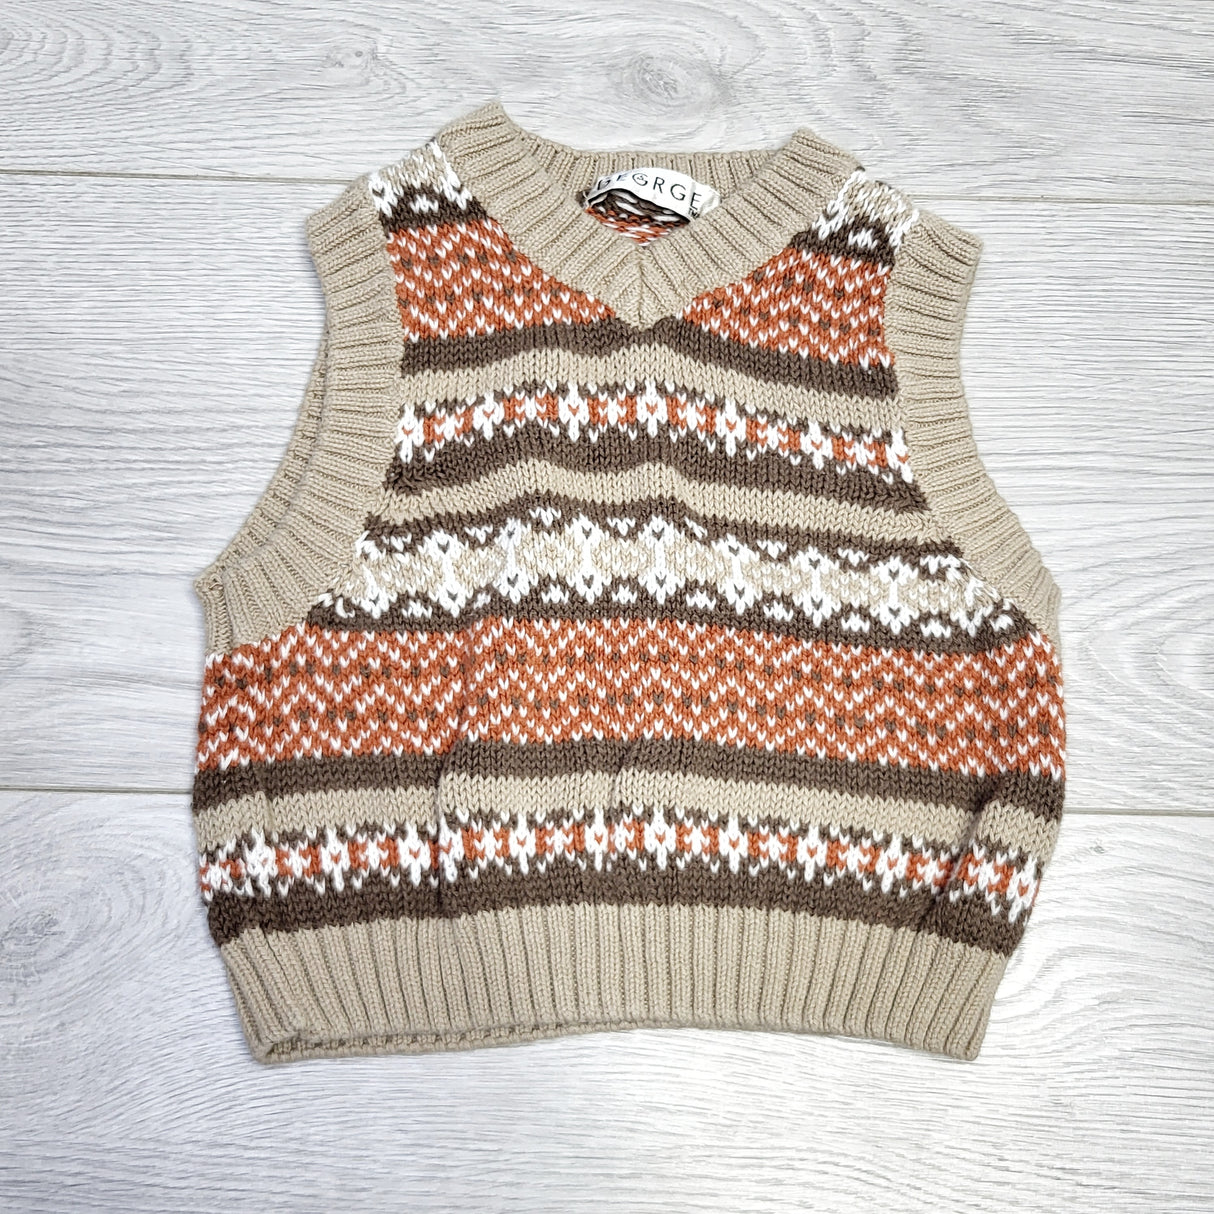 MSNDS11 - George brown patterned sweater vest. Size 6 months